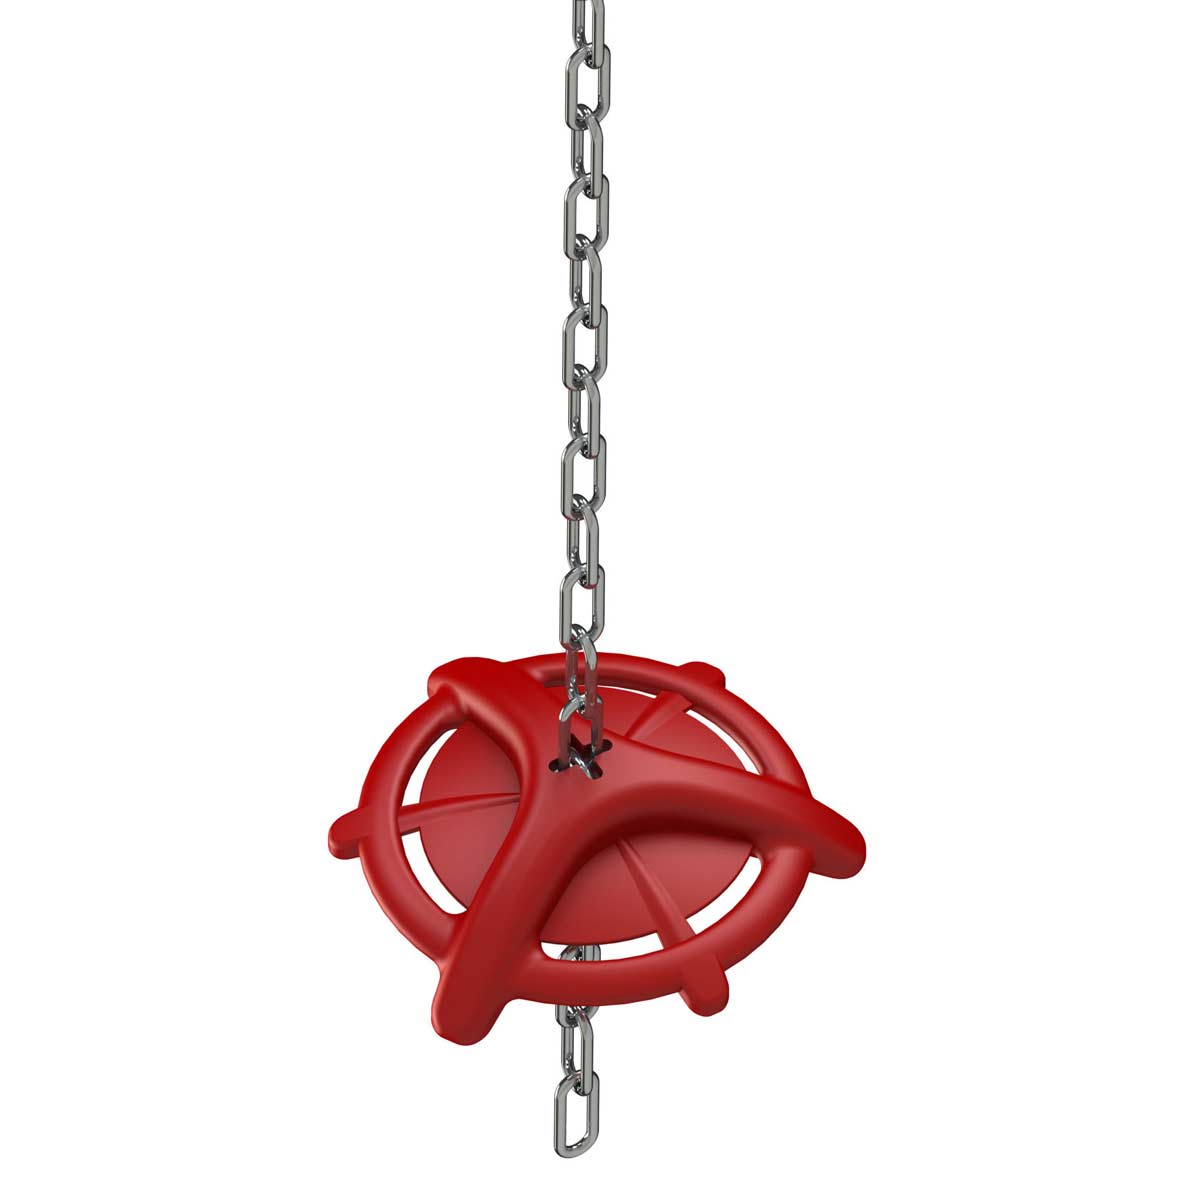 Piglet teething ring with suspension chain 75 cm